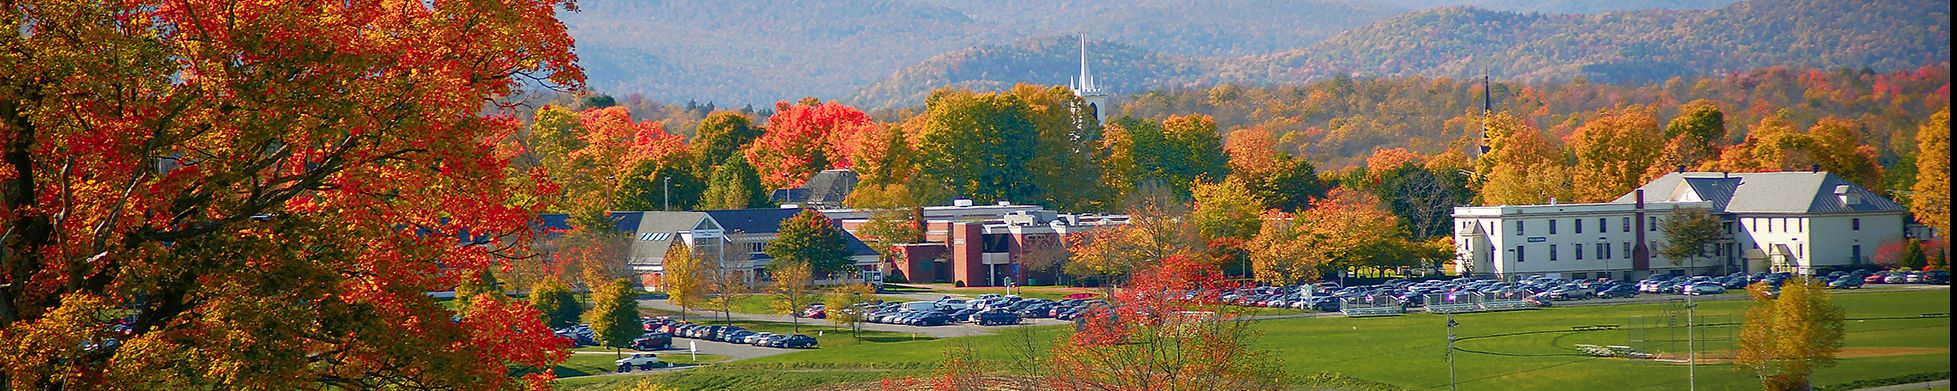 Campus view of Vermont Technical College in Randolph VT